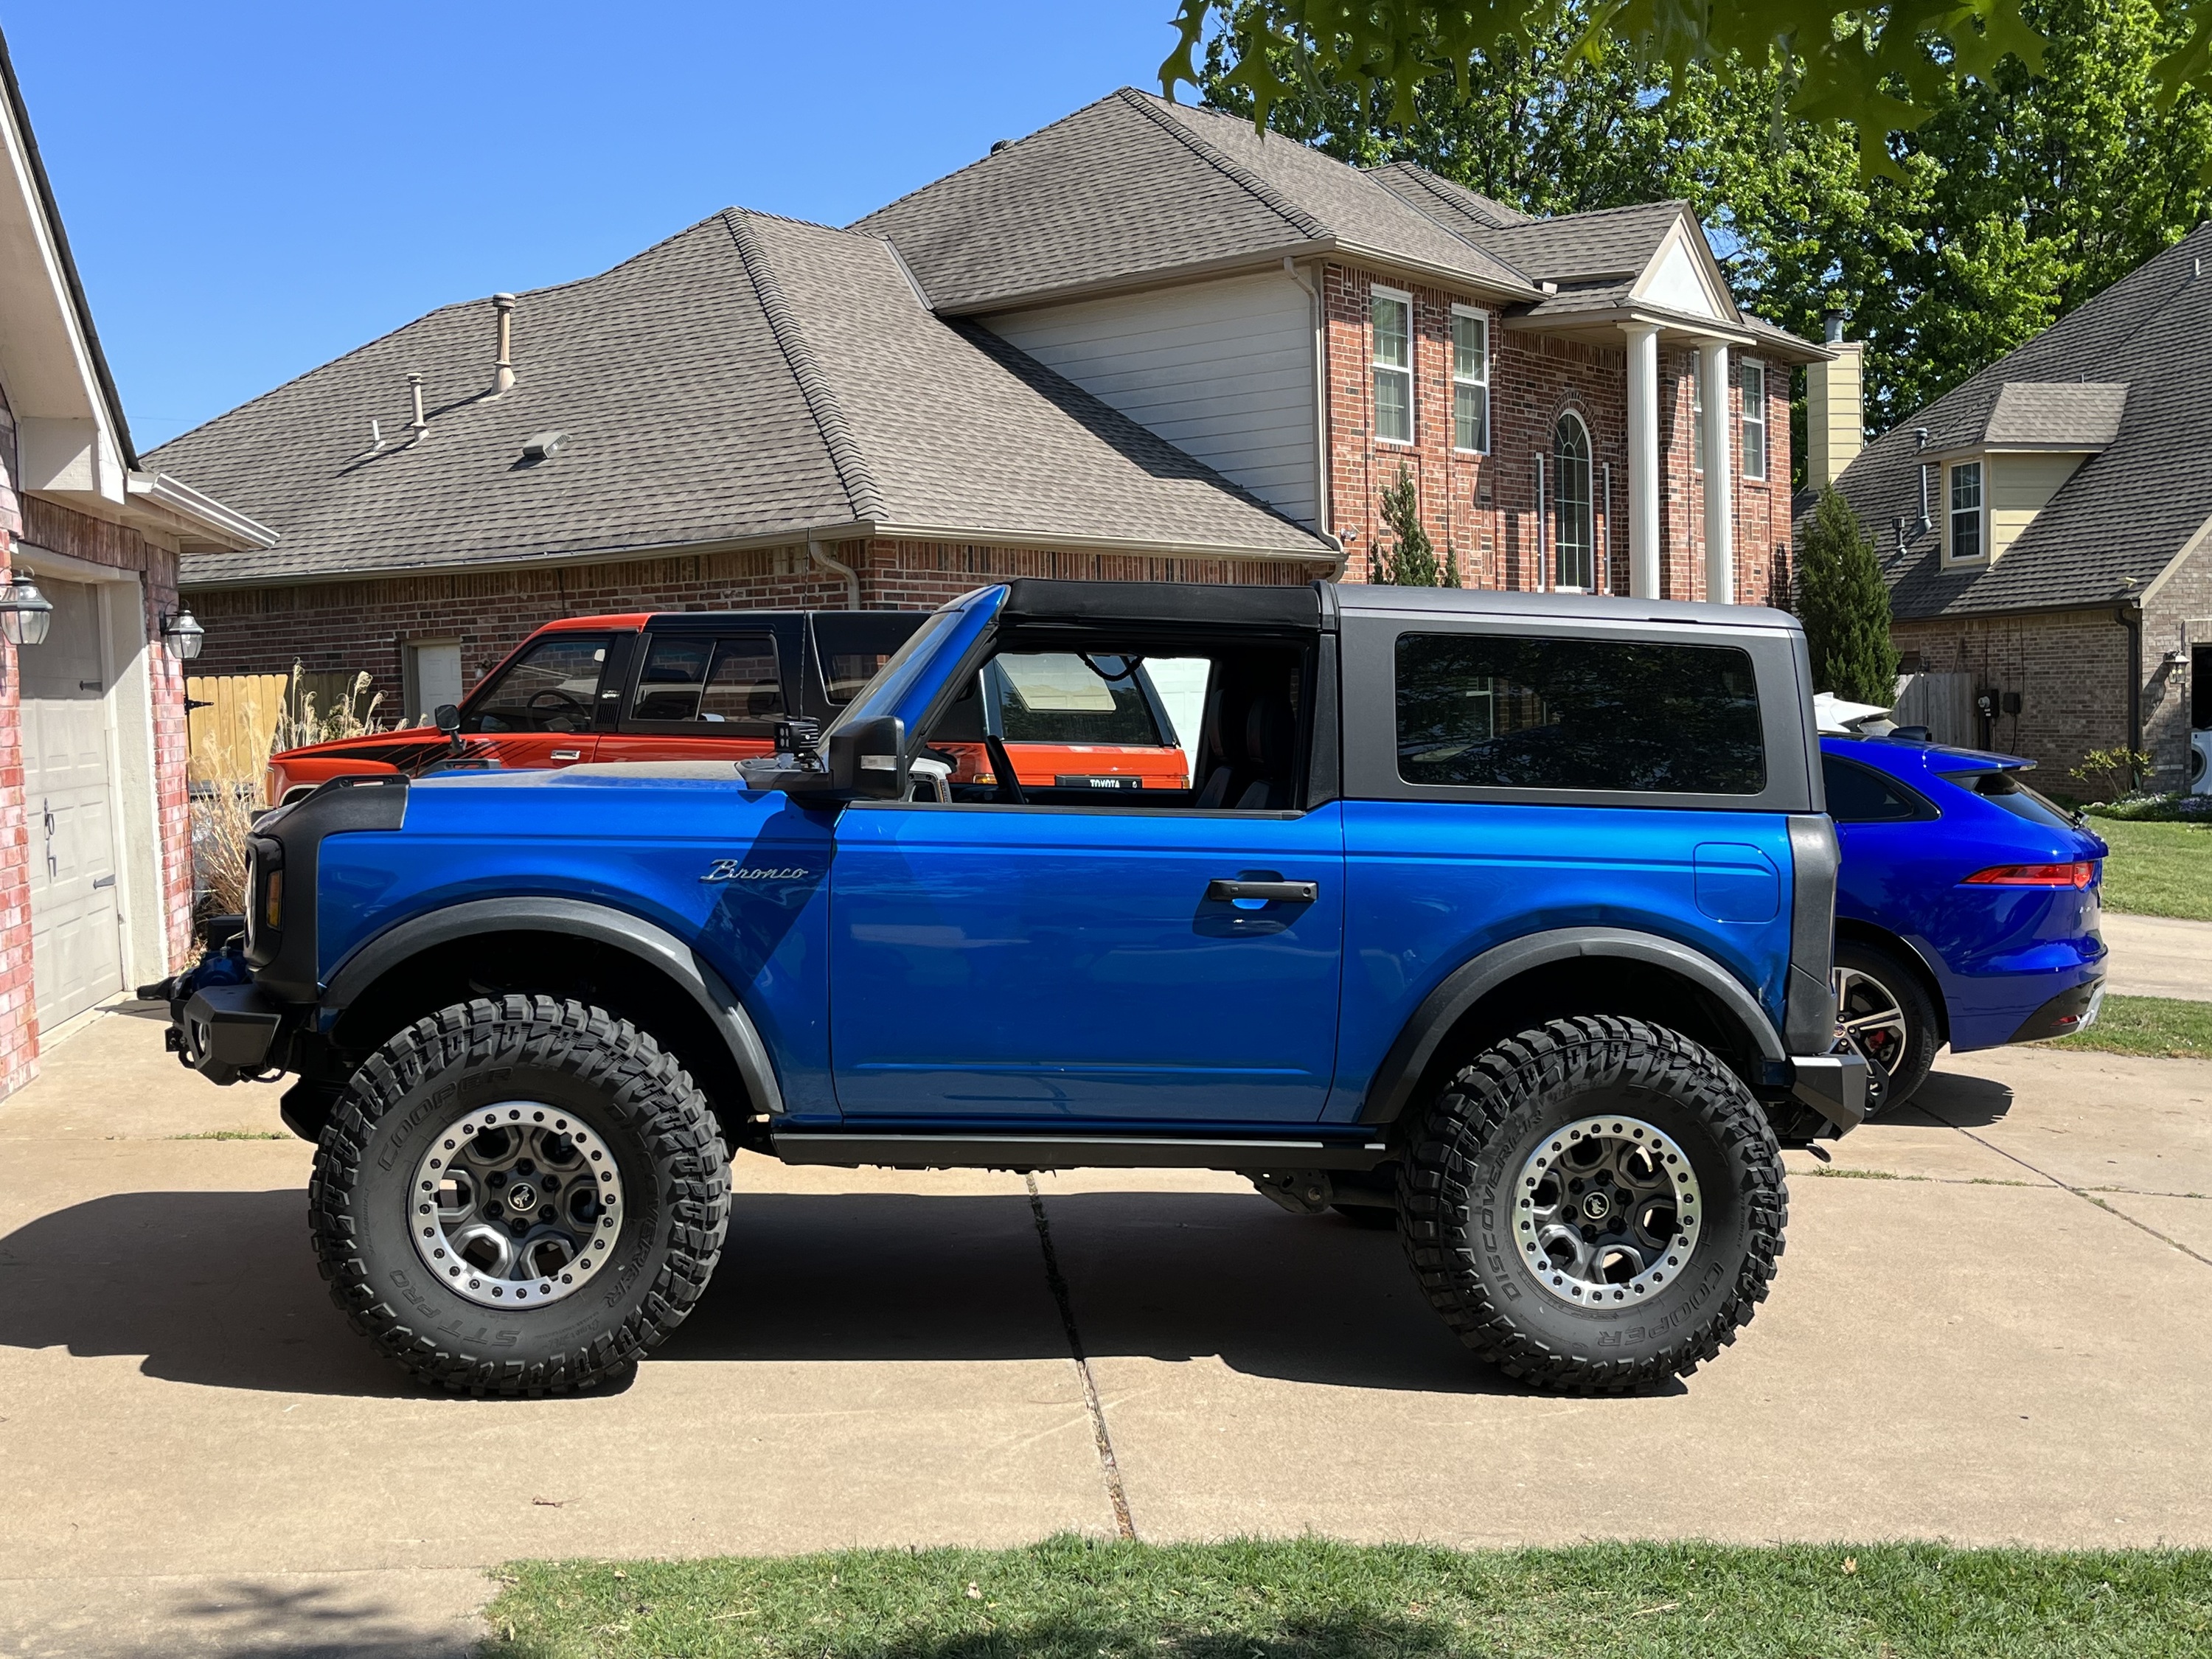 Ford Bronco Before & After Photos. Let's See Your Bronco! nSU0NfH